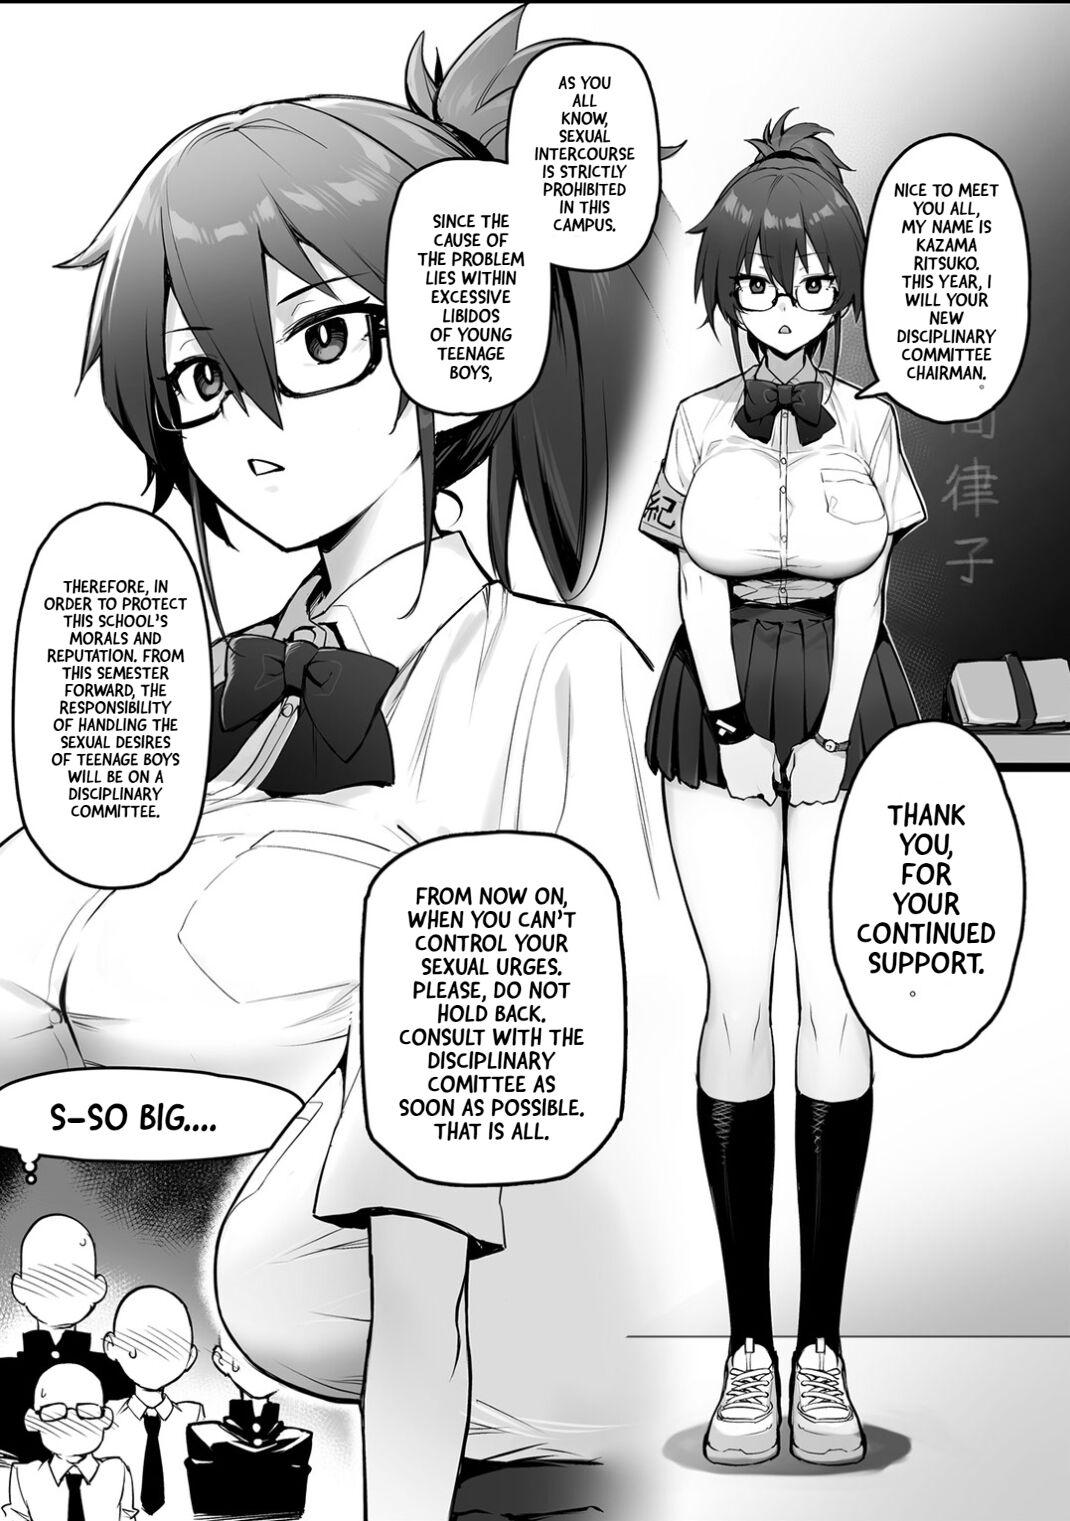 Cute Rumor Has It That The New Chairman of Disciplinary Committee Has Huge Breasts. Toy - Page 7